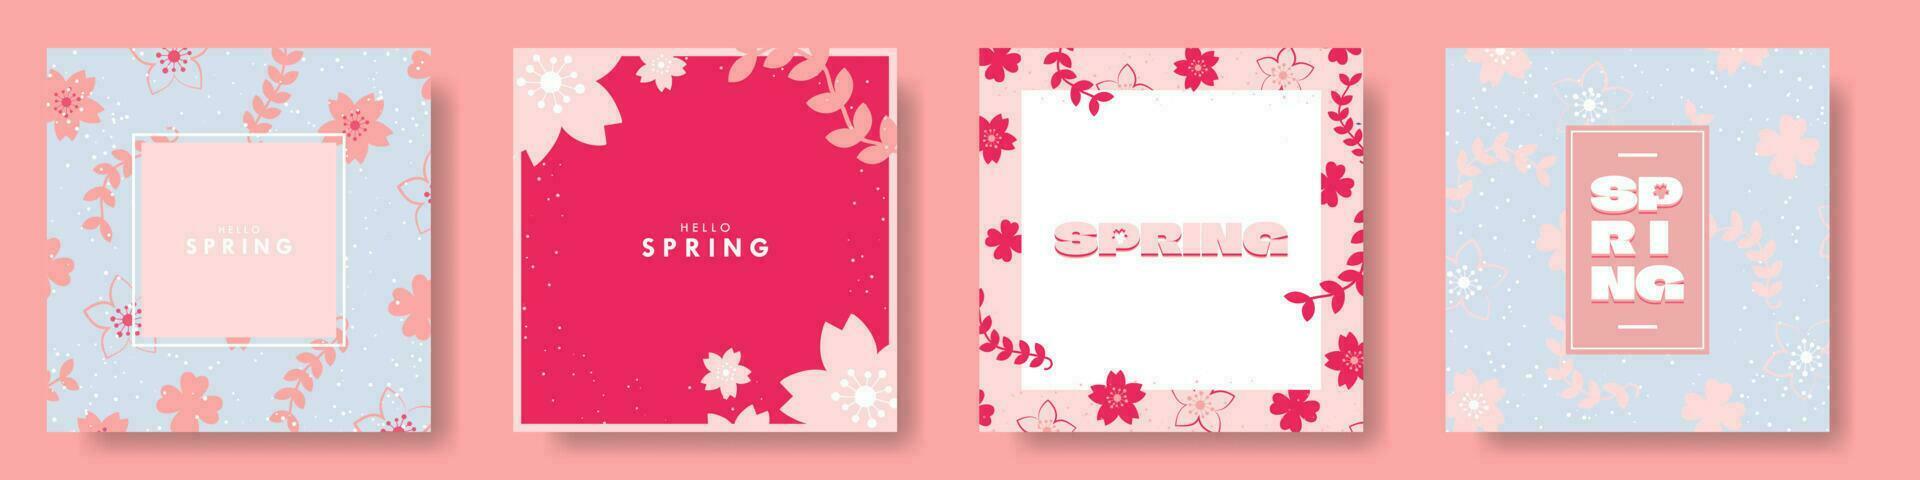 Hello Spring Card Poster Set. Trendy and colorful floral designs. Vector Illustration. EPS 10.